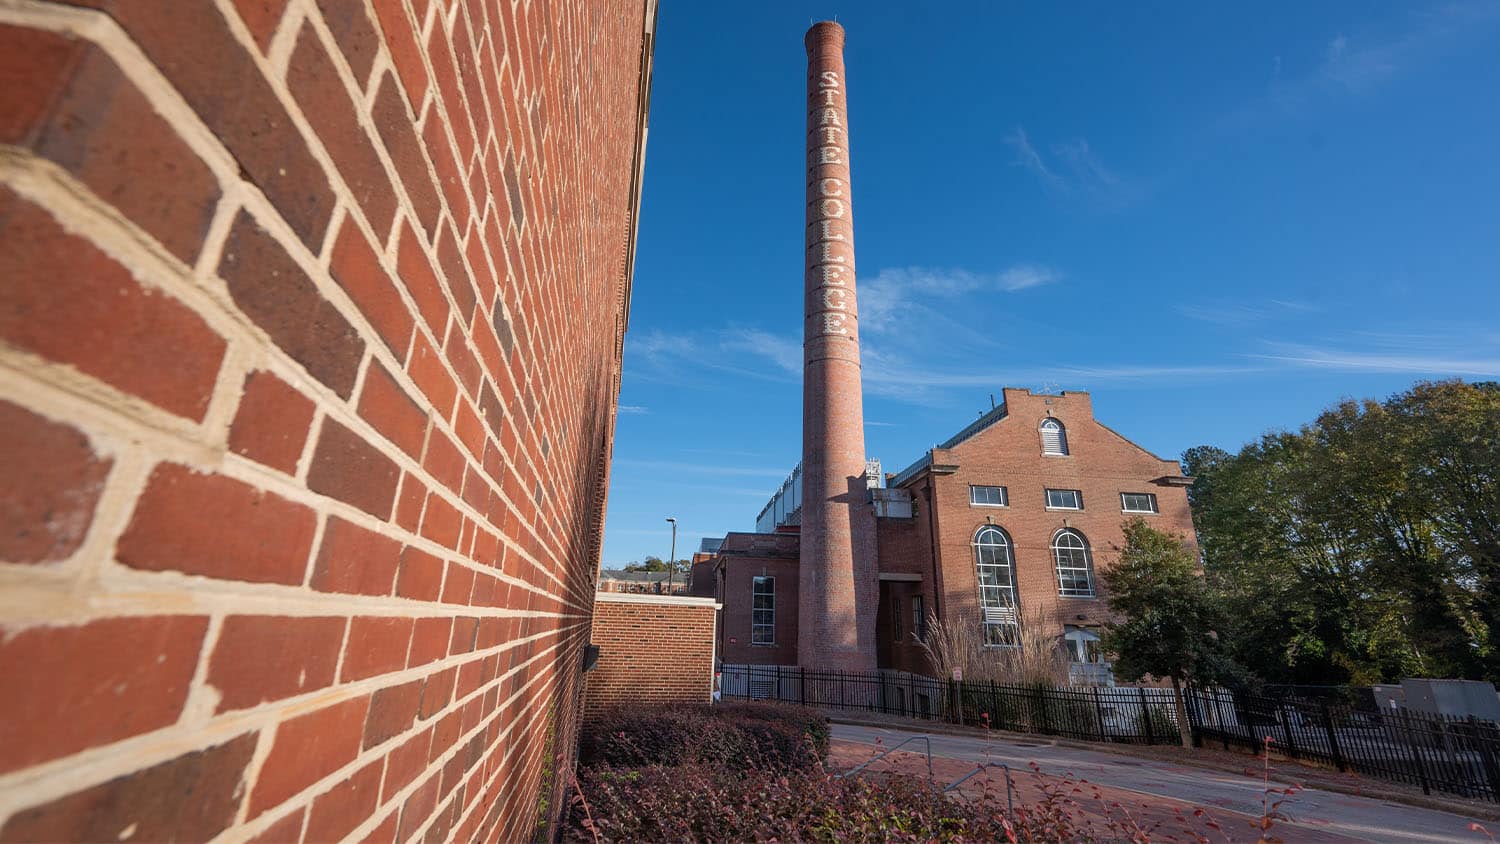 The historic brick smoke stack on central campus